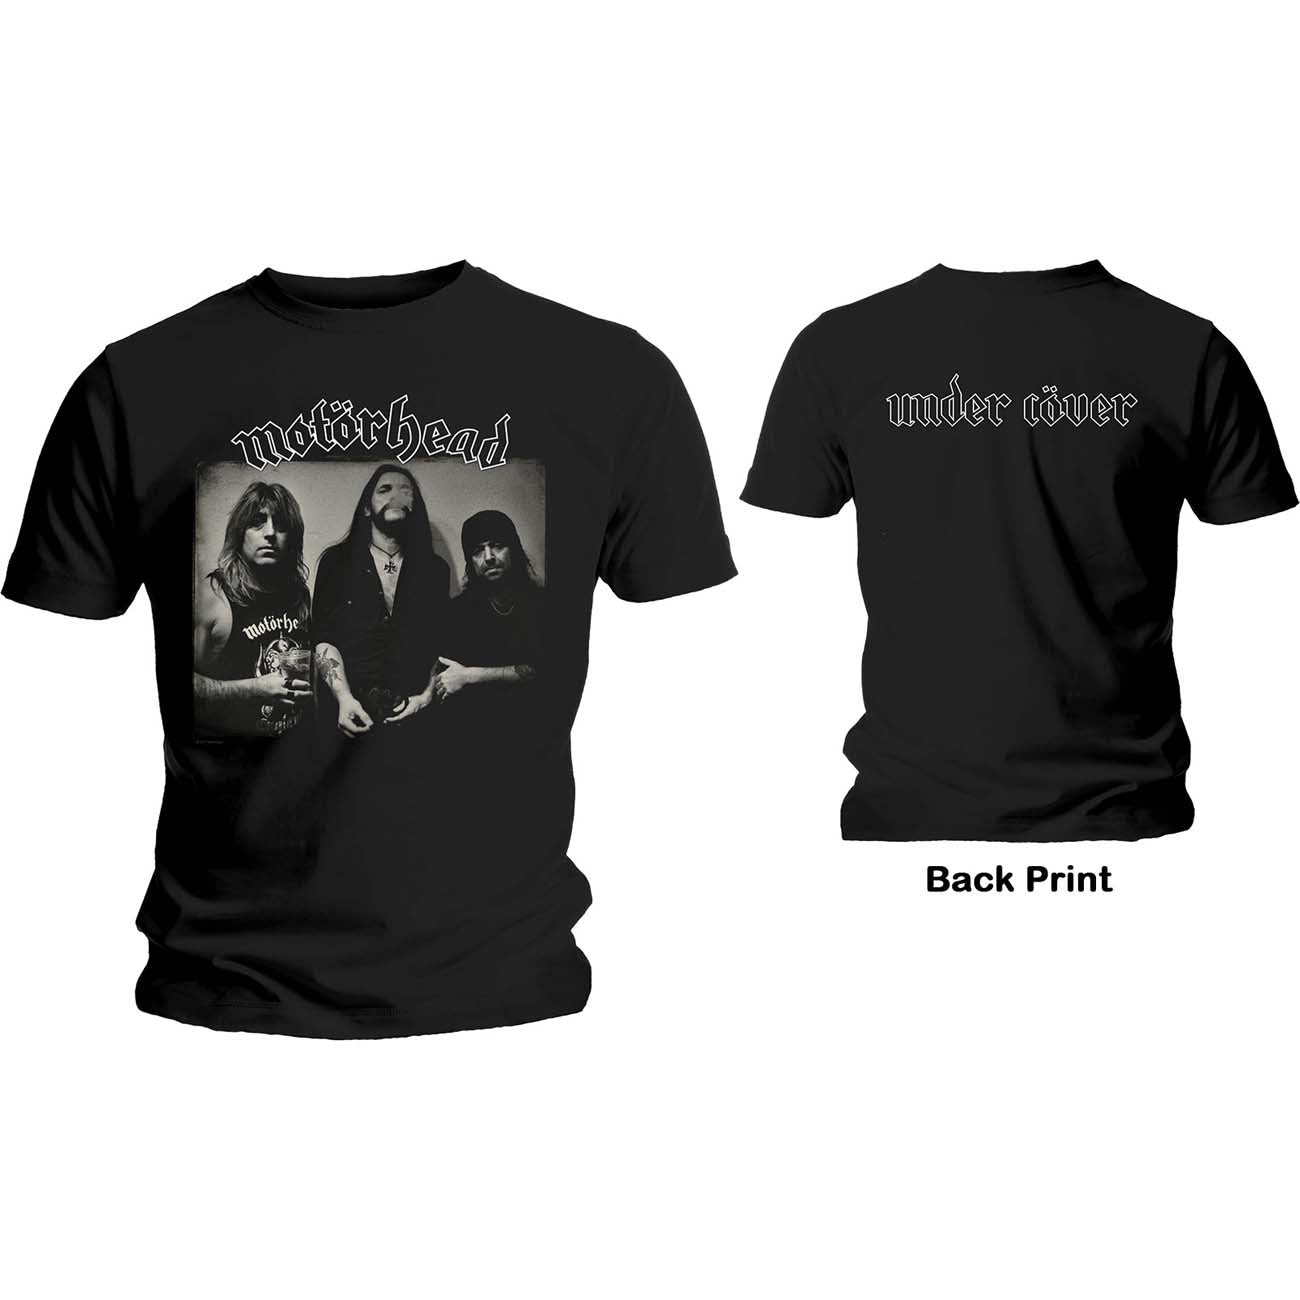 Motorhead T-Shirt - Under Cover Album Cover (Unisex) - Front and Back